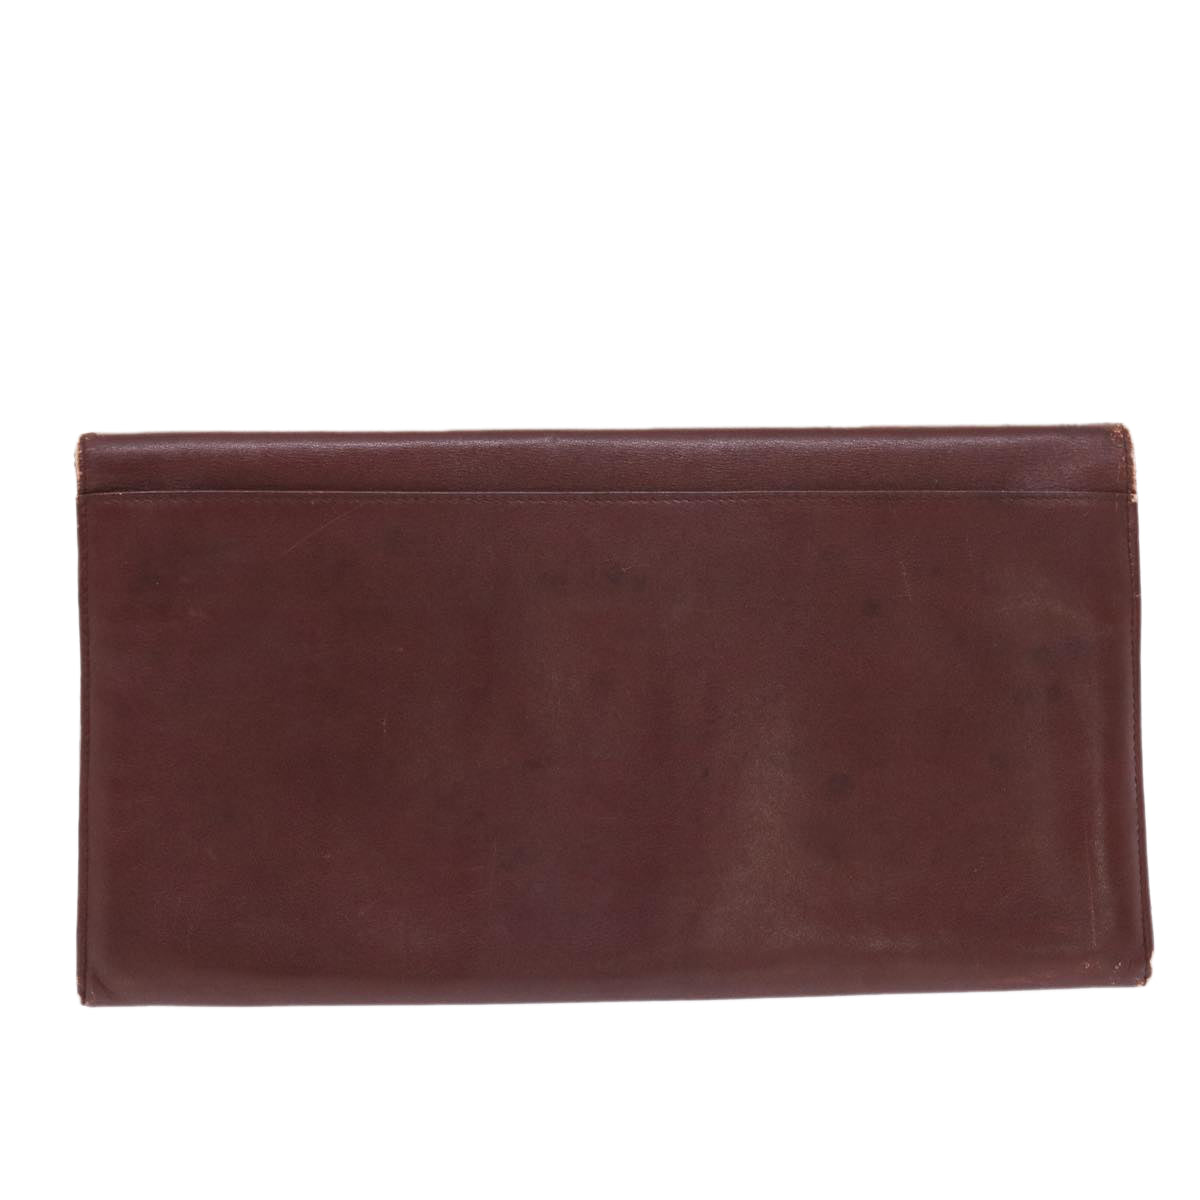 CARTIER Clutch Bag Leather Wine Red Auth 50447 - 0